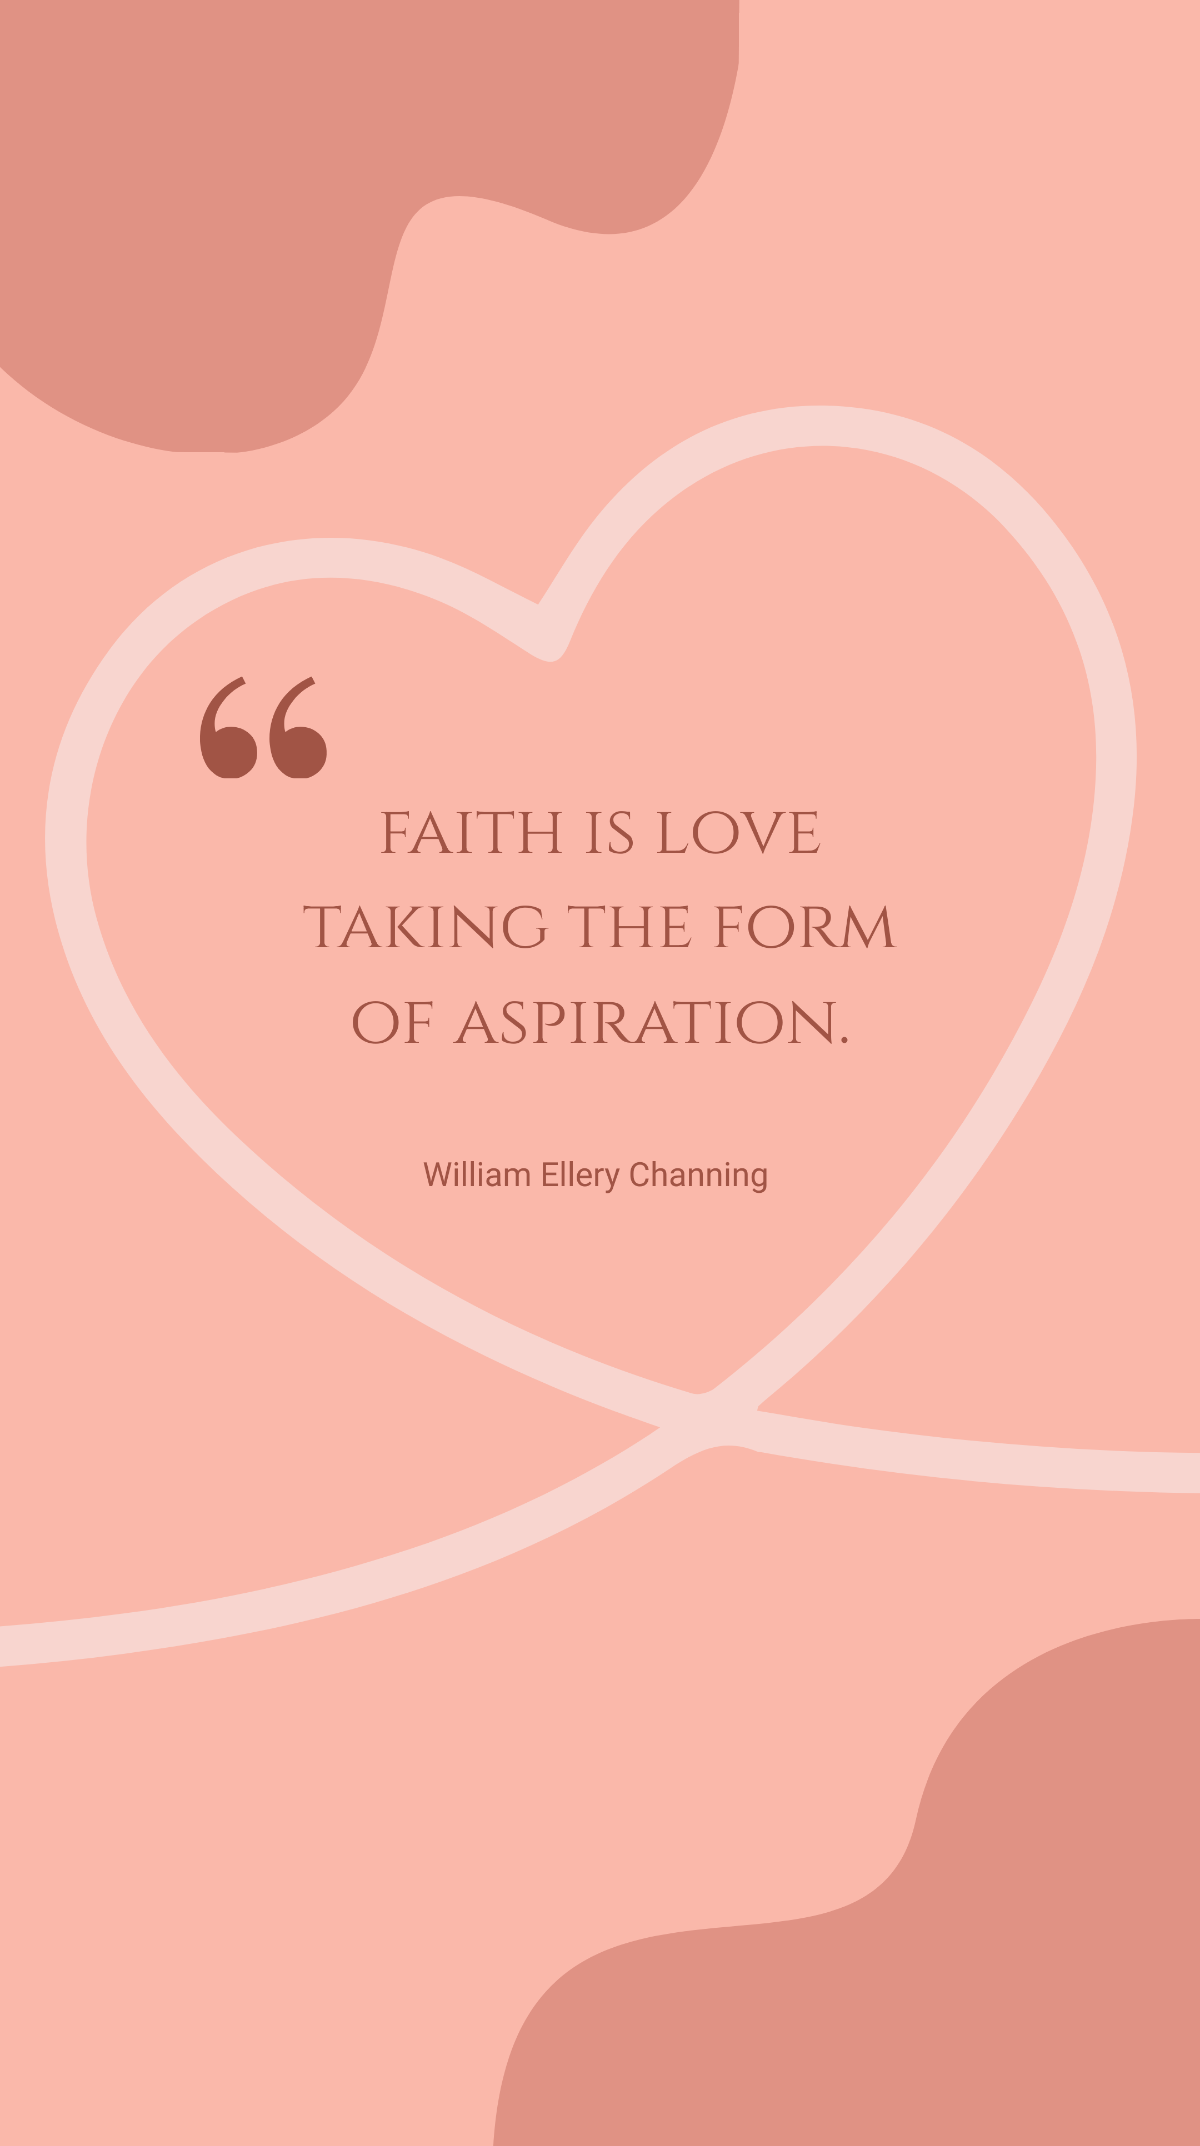 William Ellery Channing - Faith is love taking the form of aspiration. Template